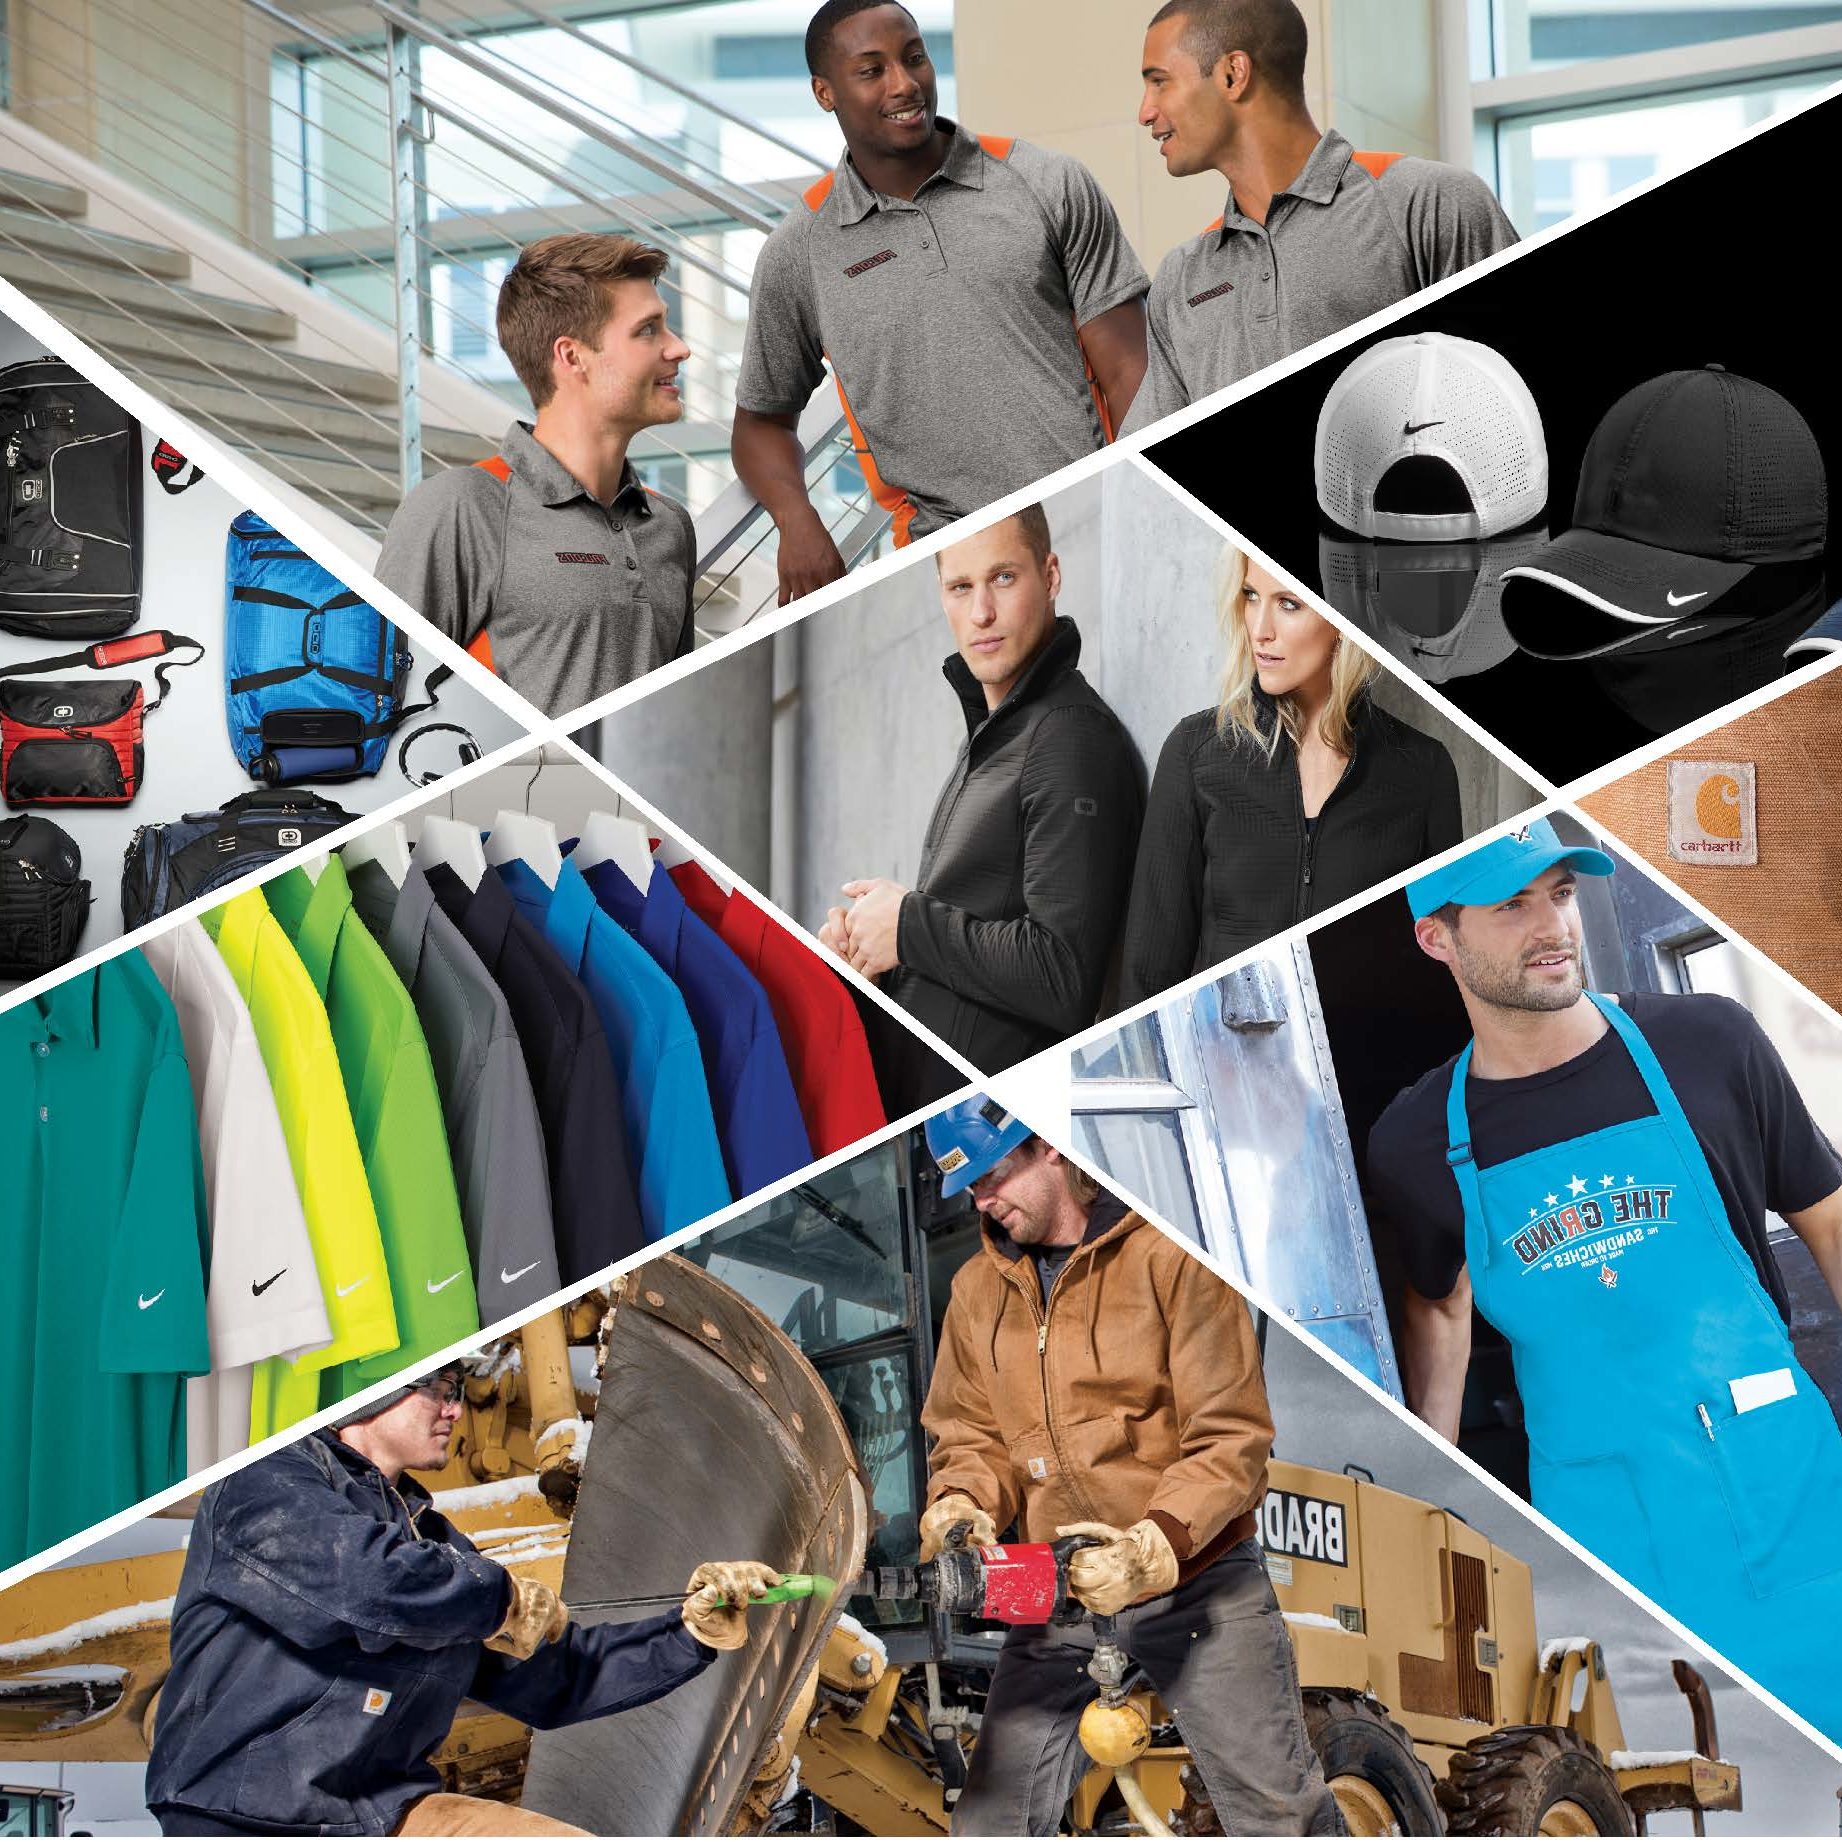 Lechner Services direct purchase catalog photo with bags, polos, hats, jackets and aprons